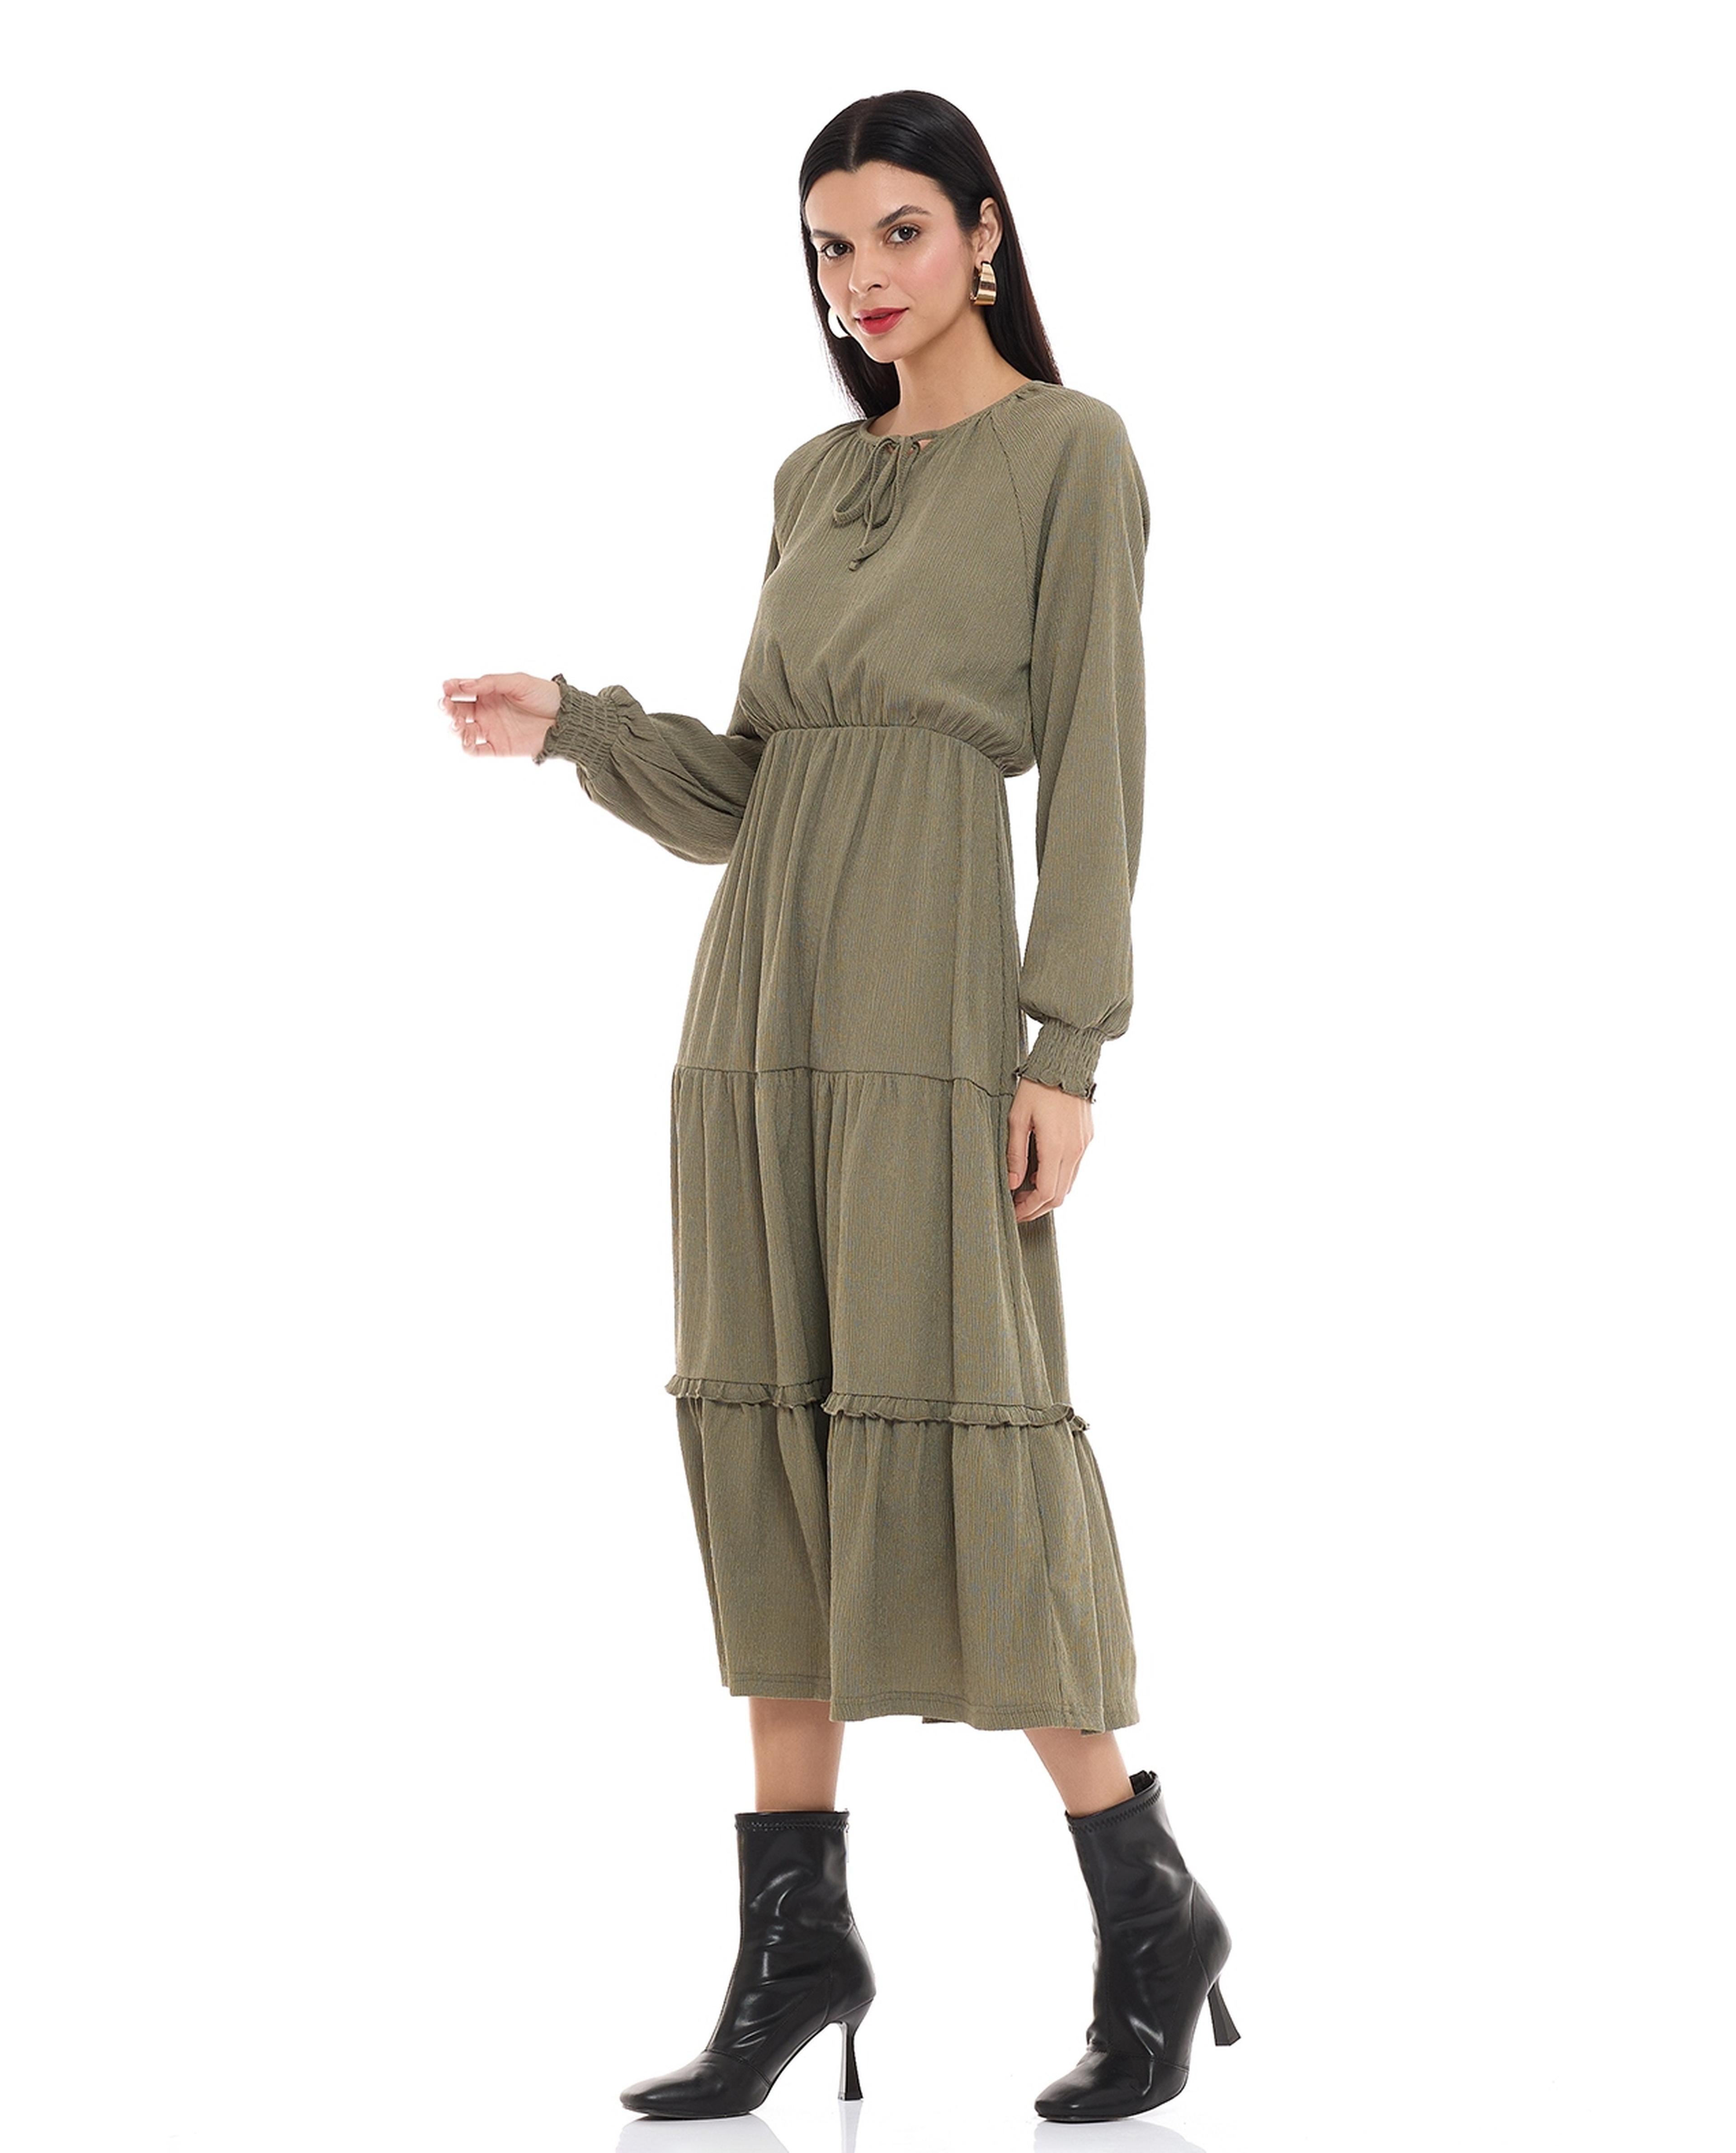 Solid Tiered Dress with Tie-Up Neck and Bishop Sleeves